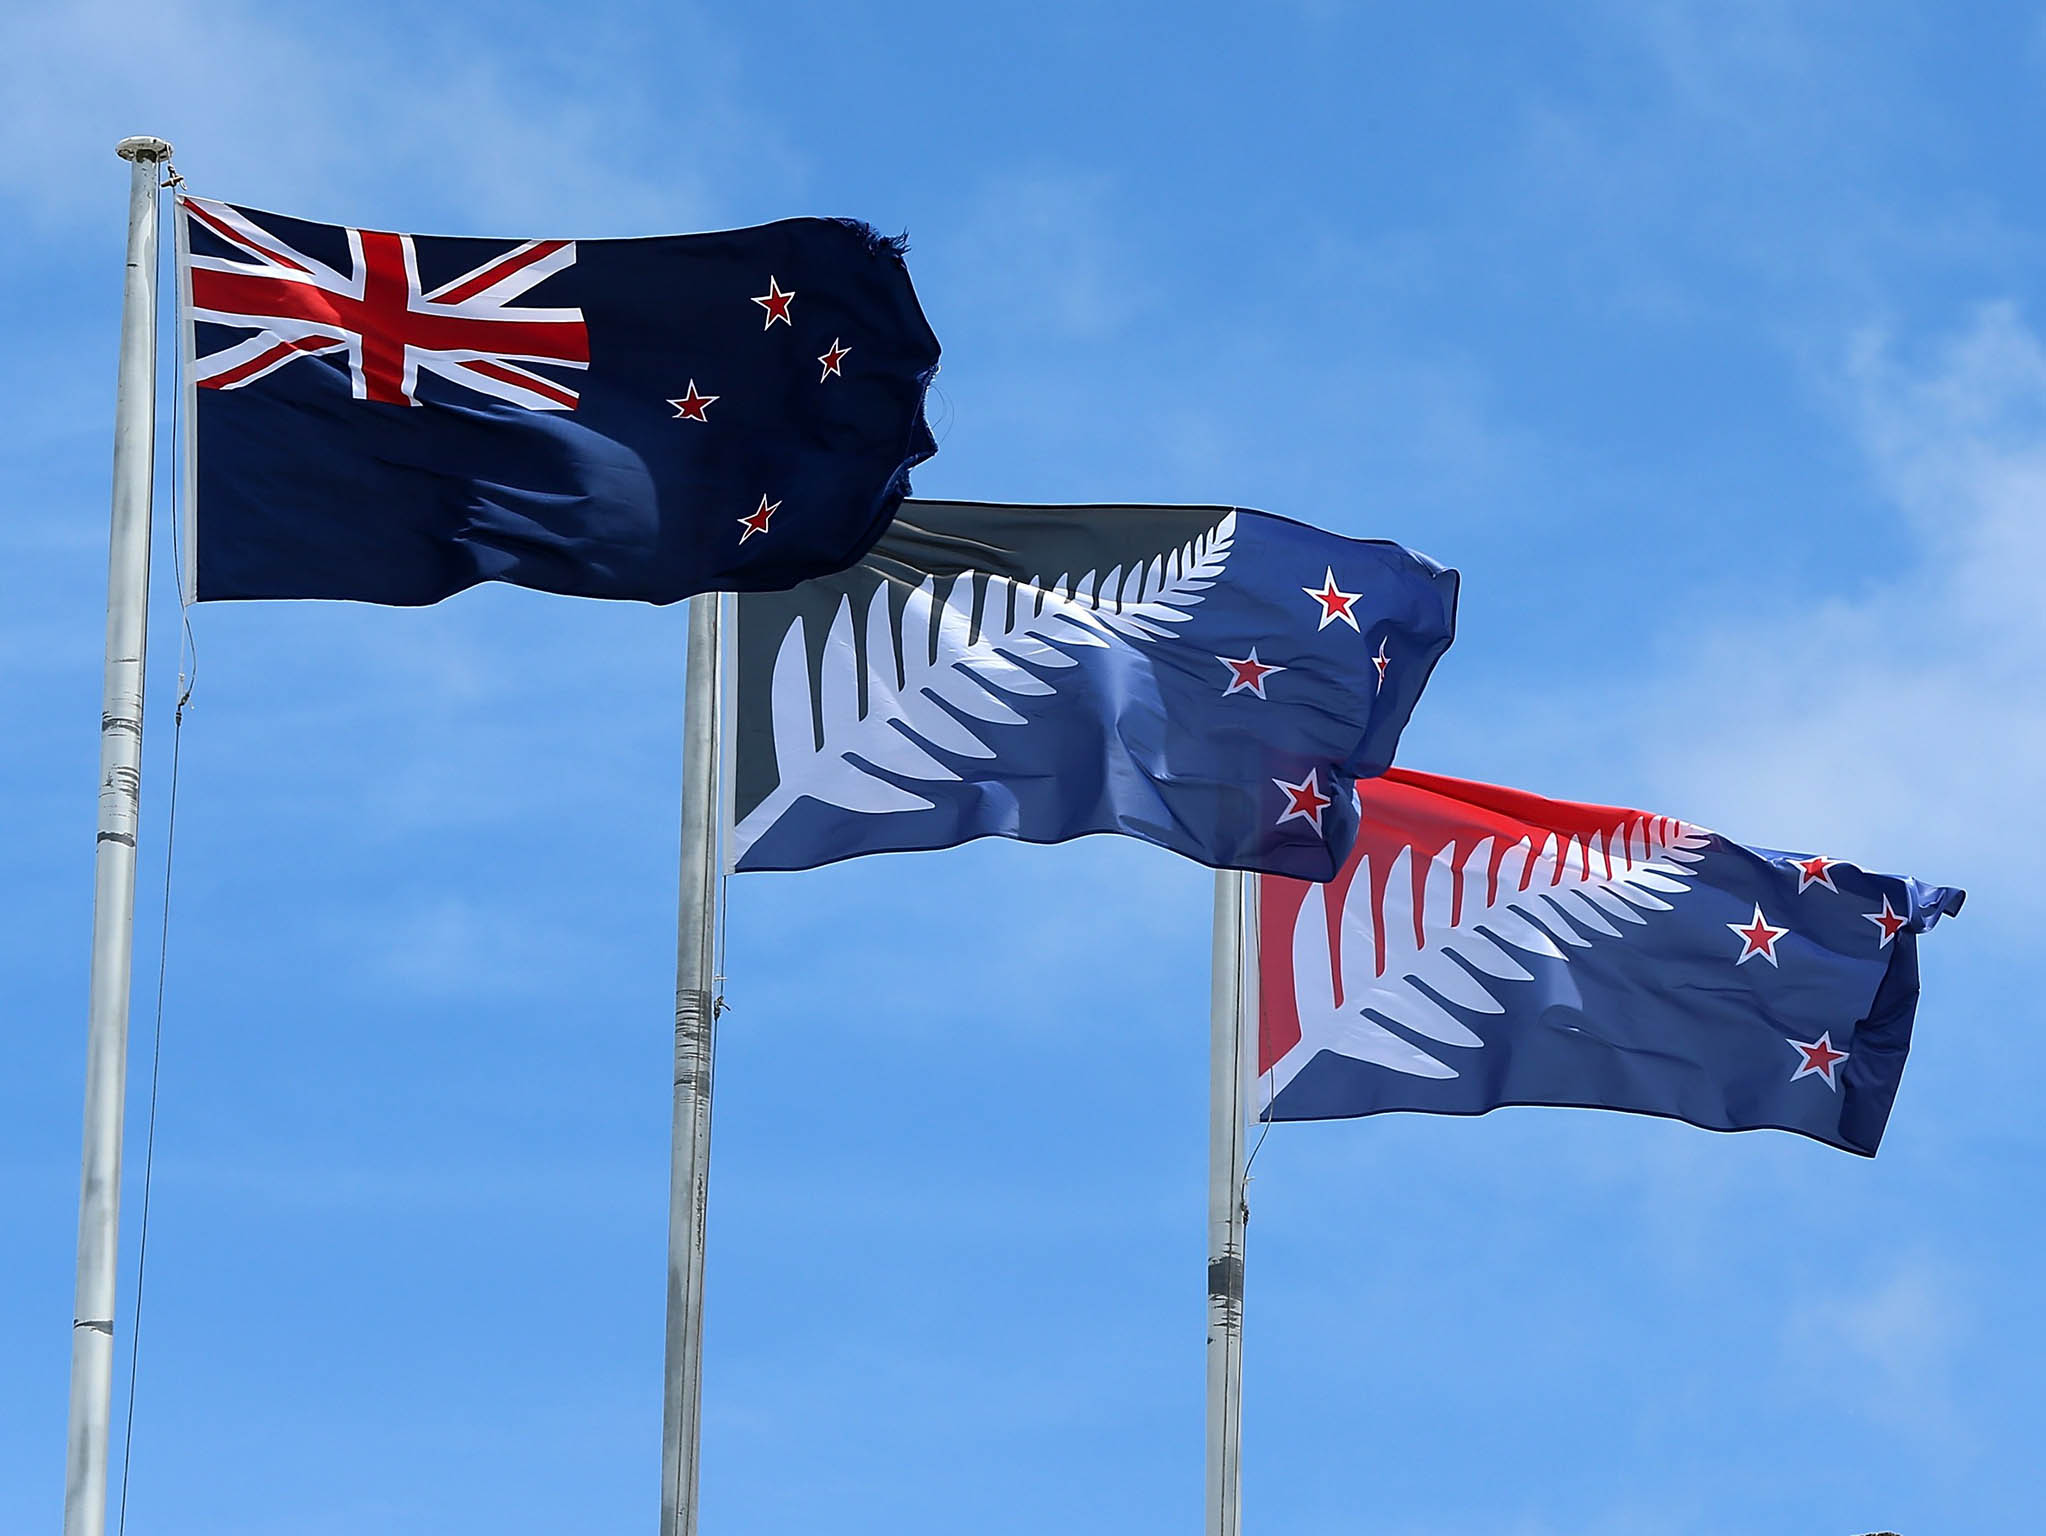 The current New Zealand flag